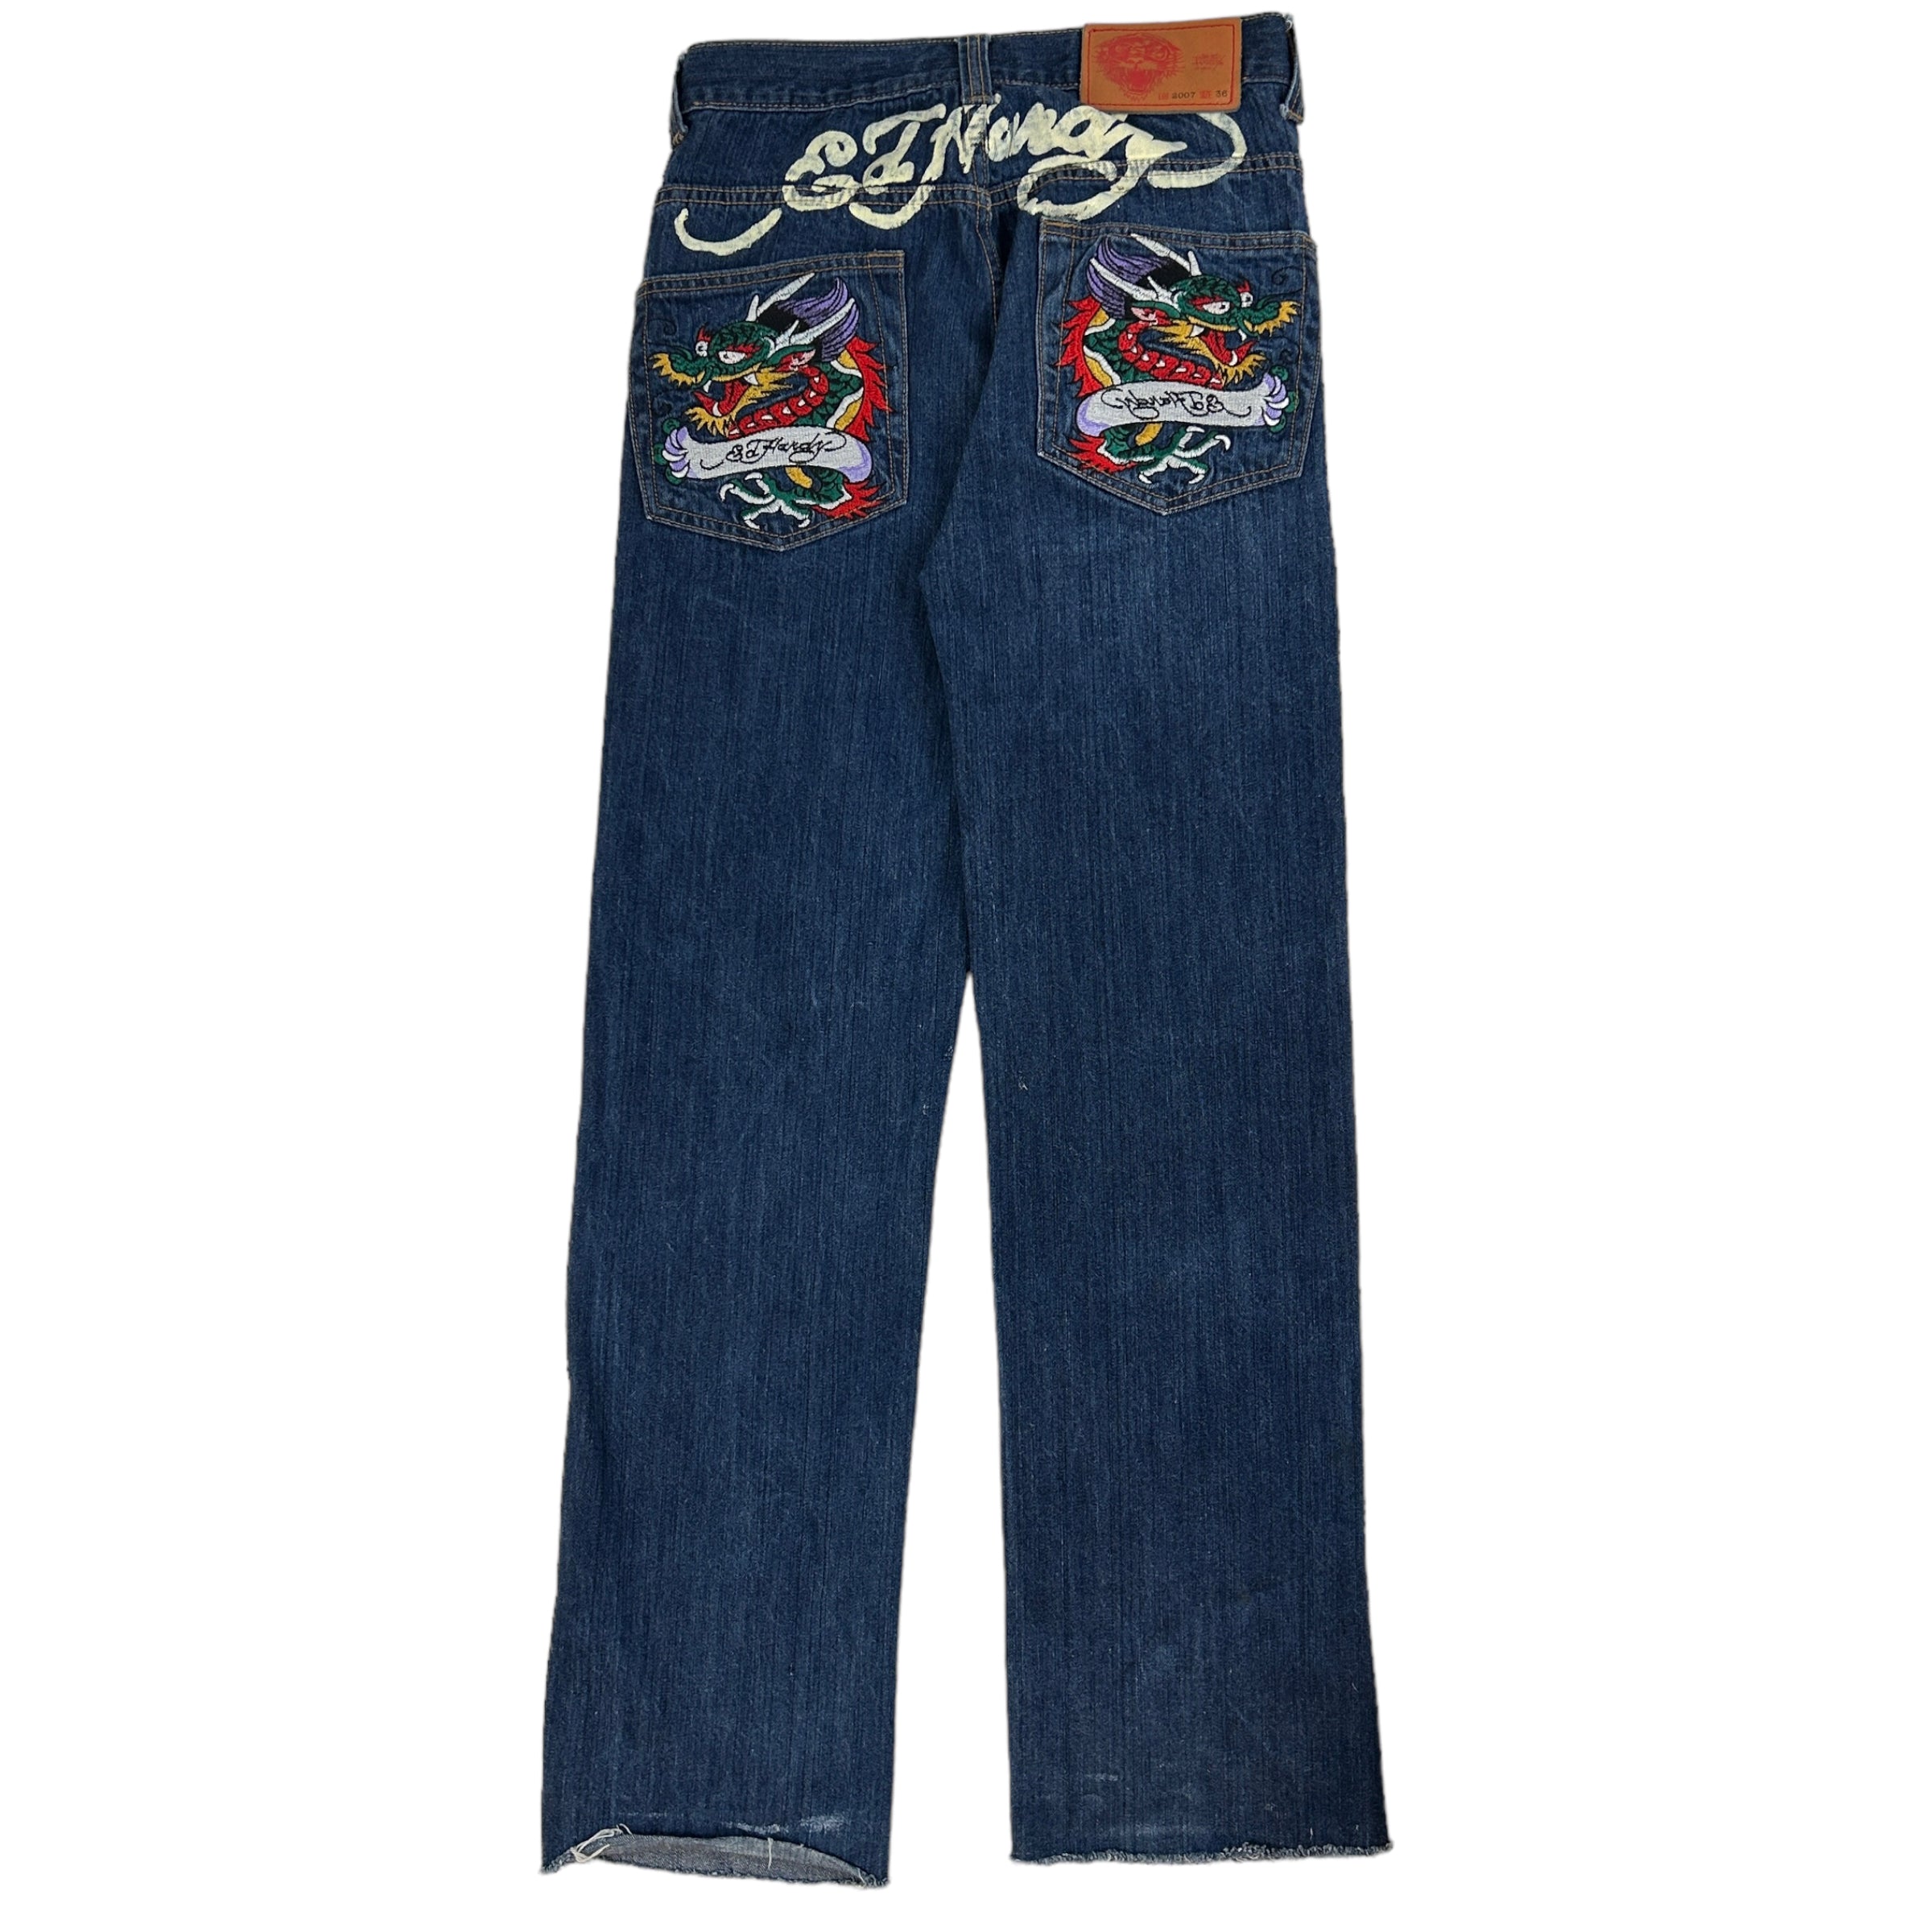 2007 Ed Hardy Embroidered Jeans